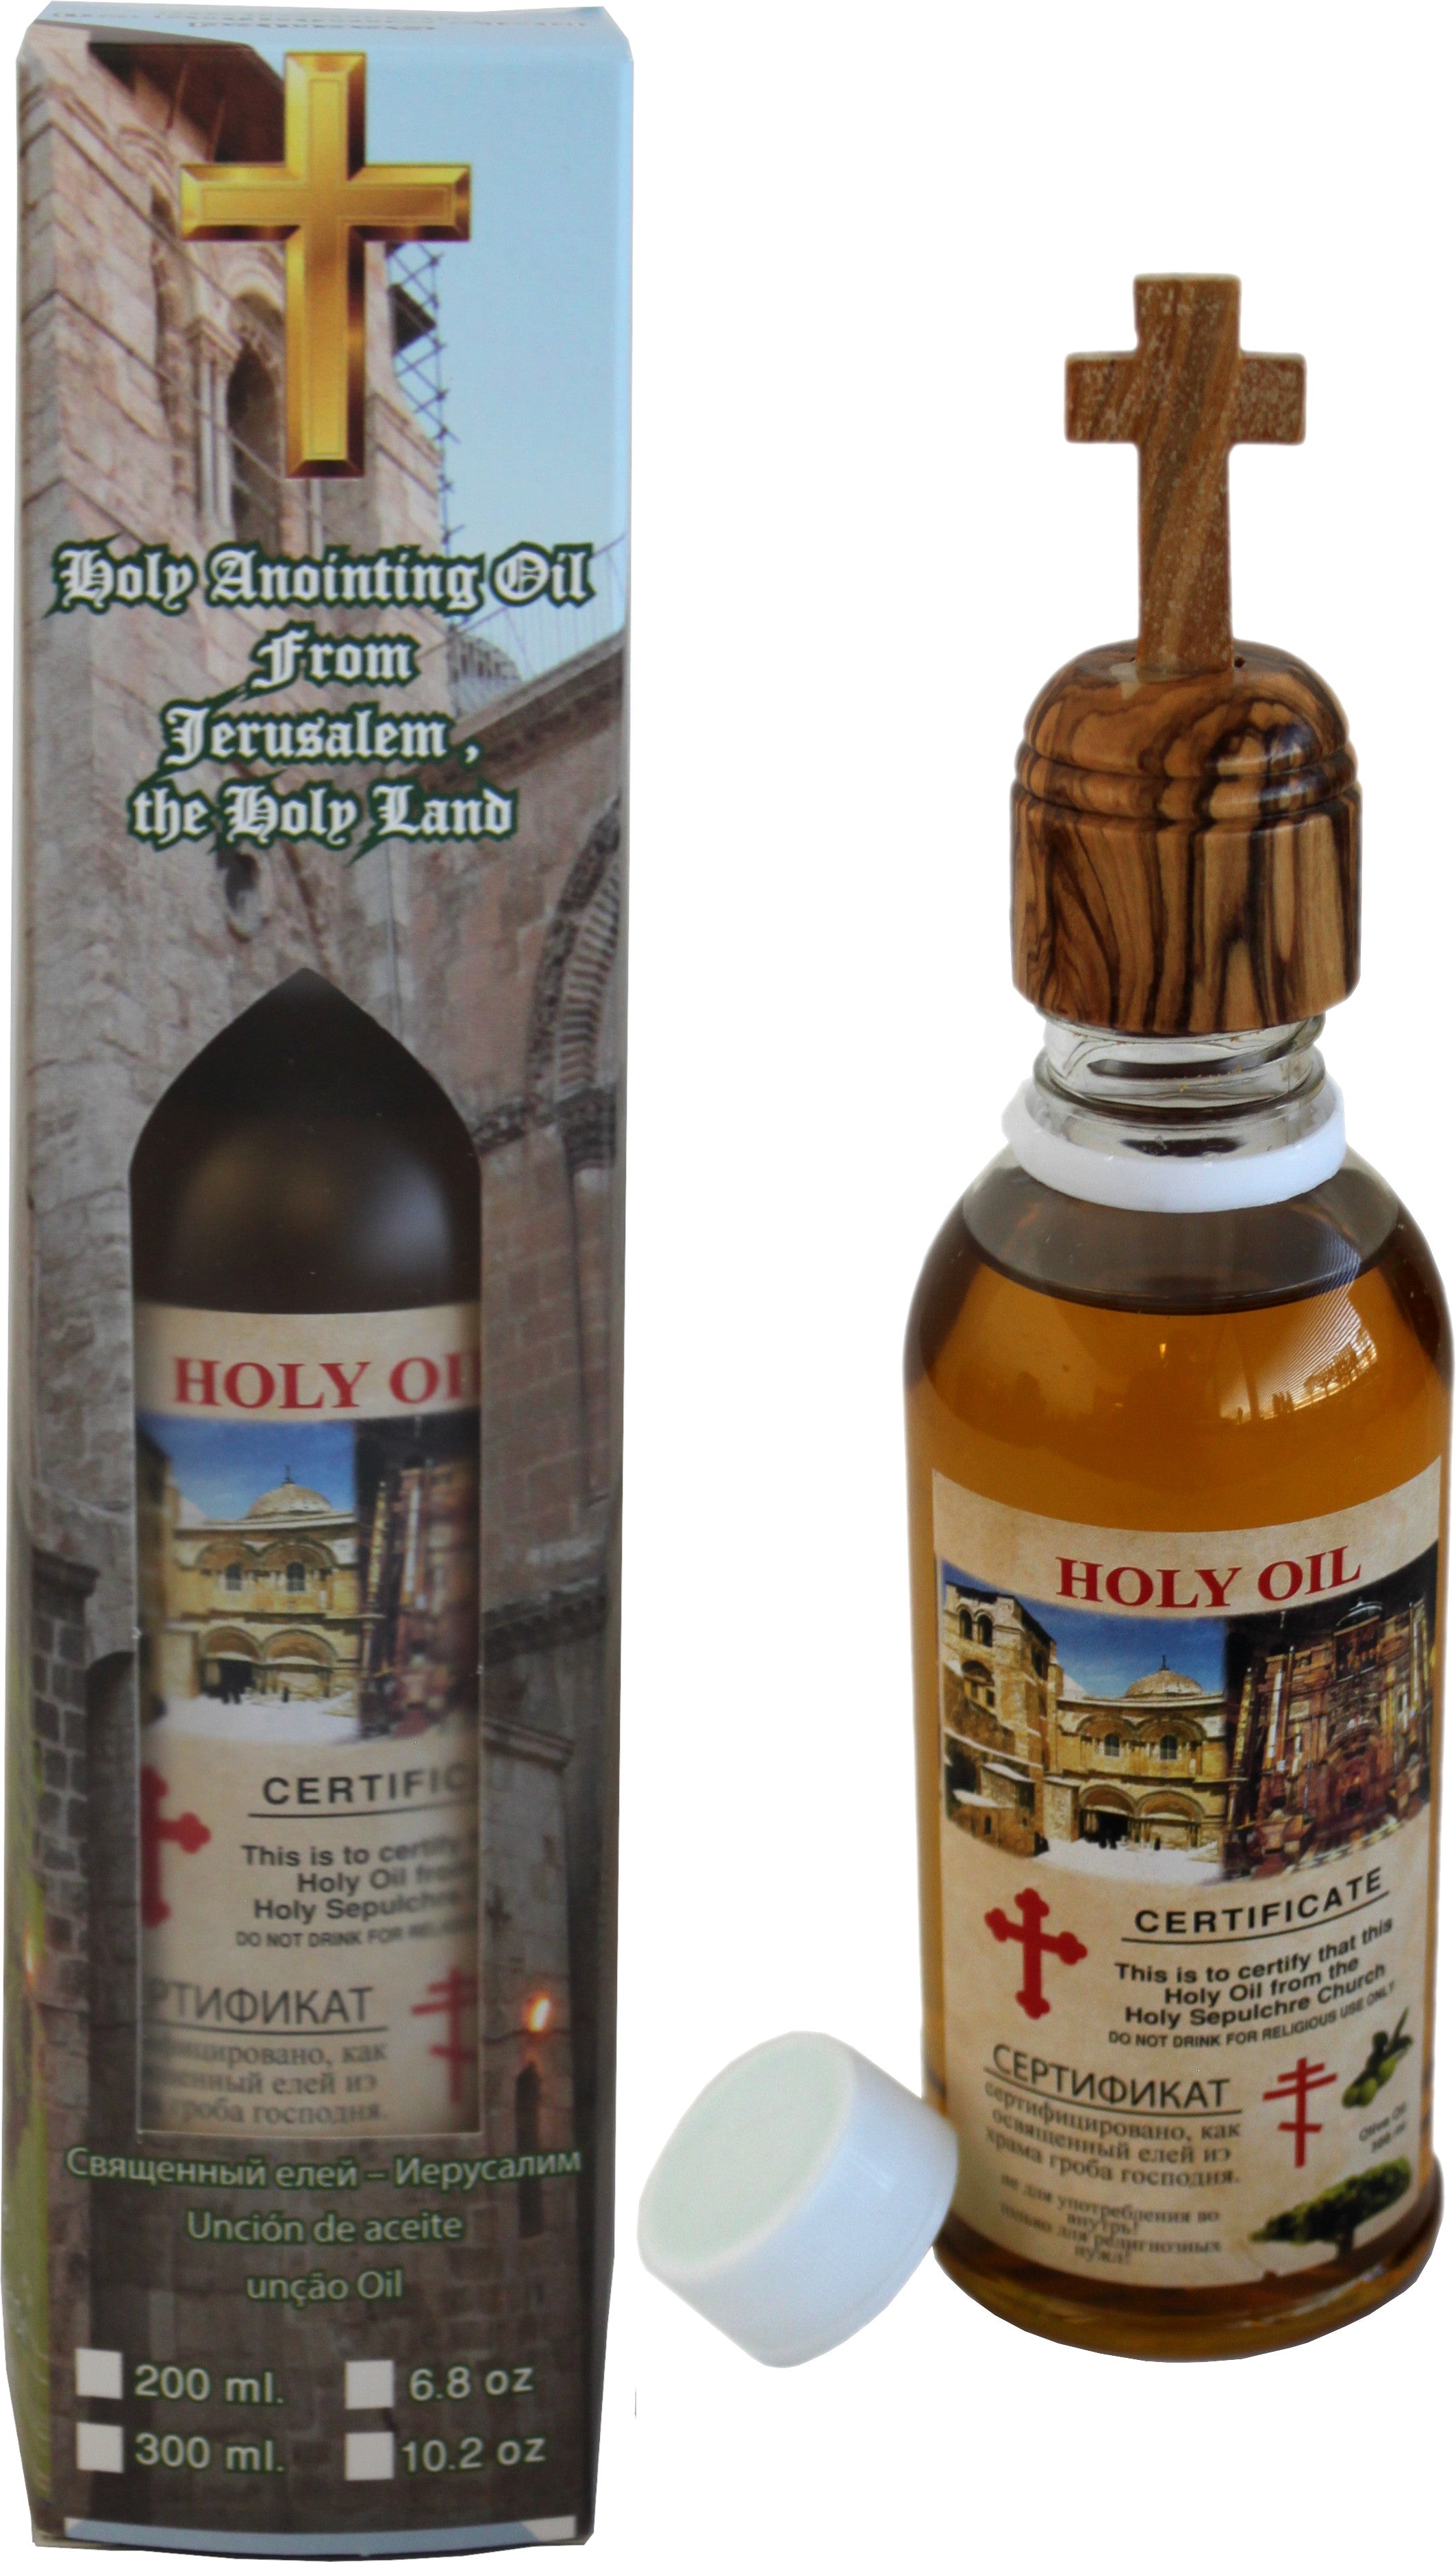 Cedar Anointing & Prayer Oil - 1/4 oz. - Museum of the Bible Store